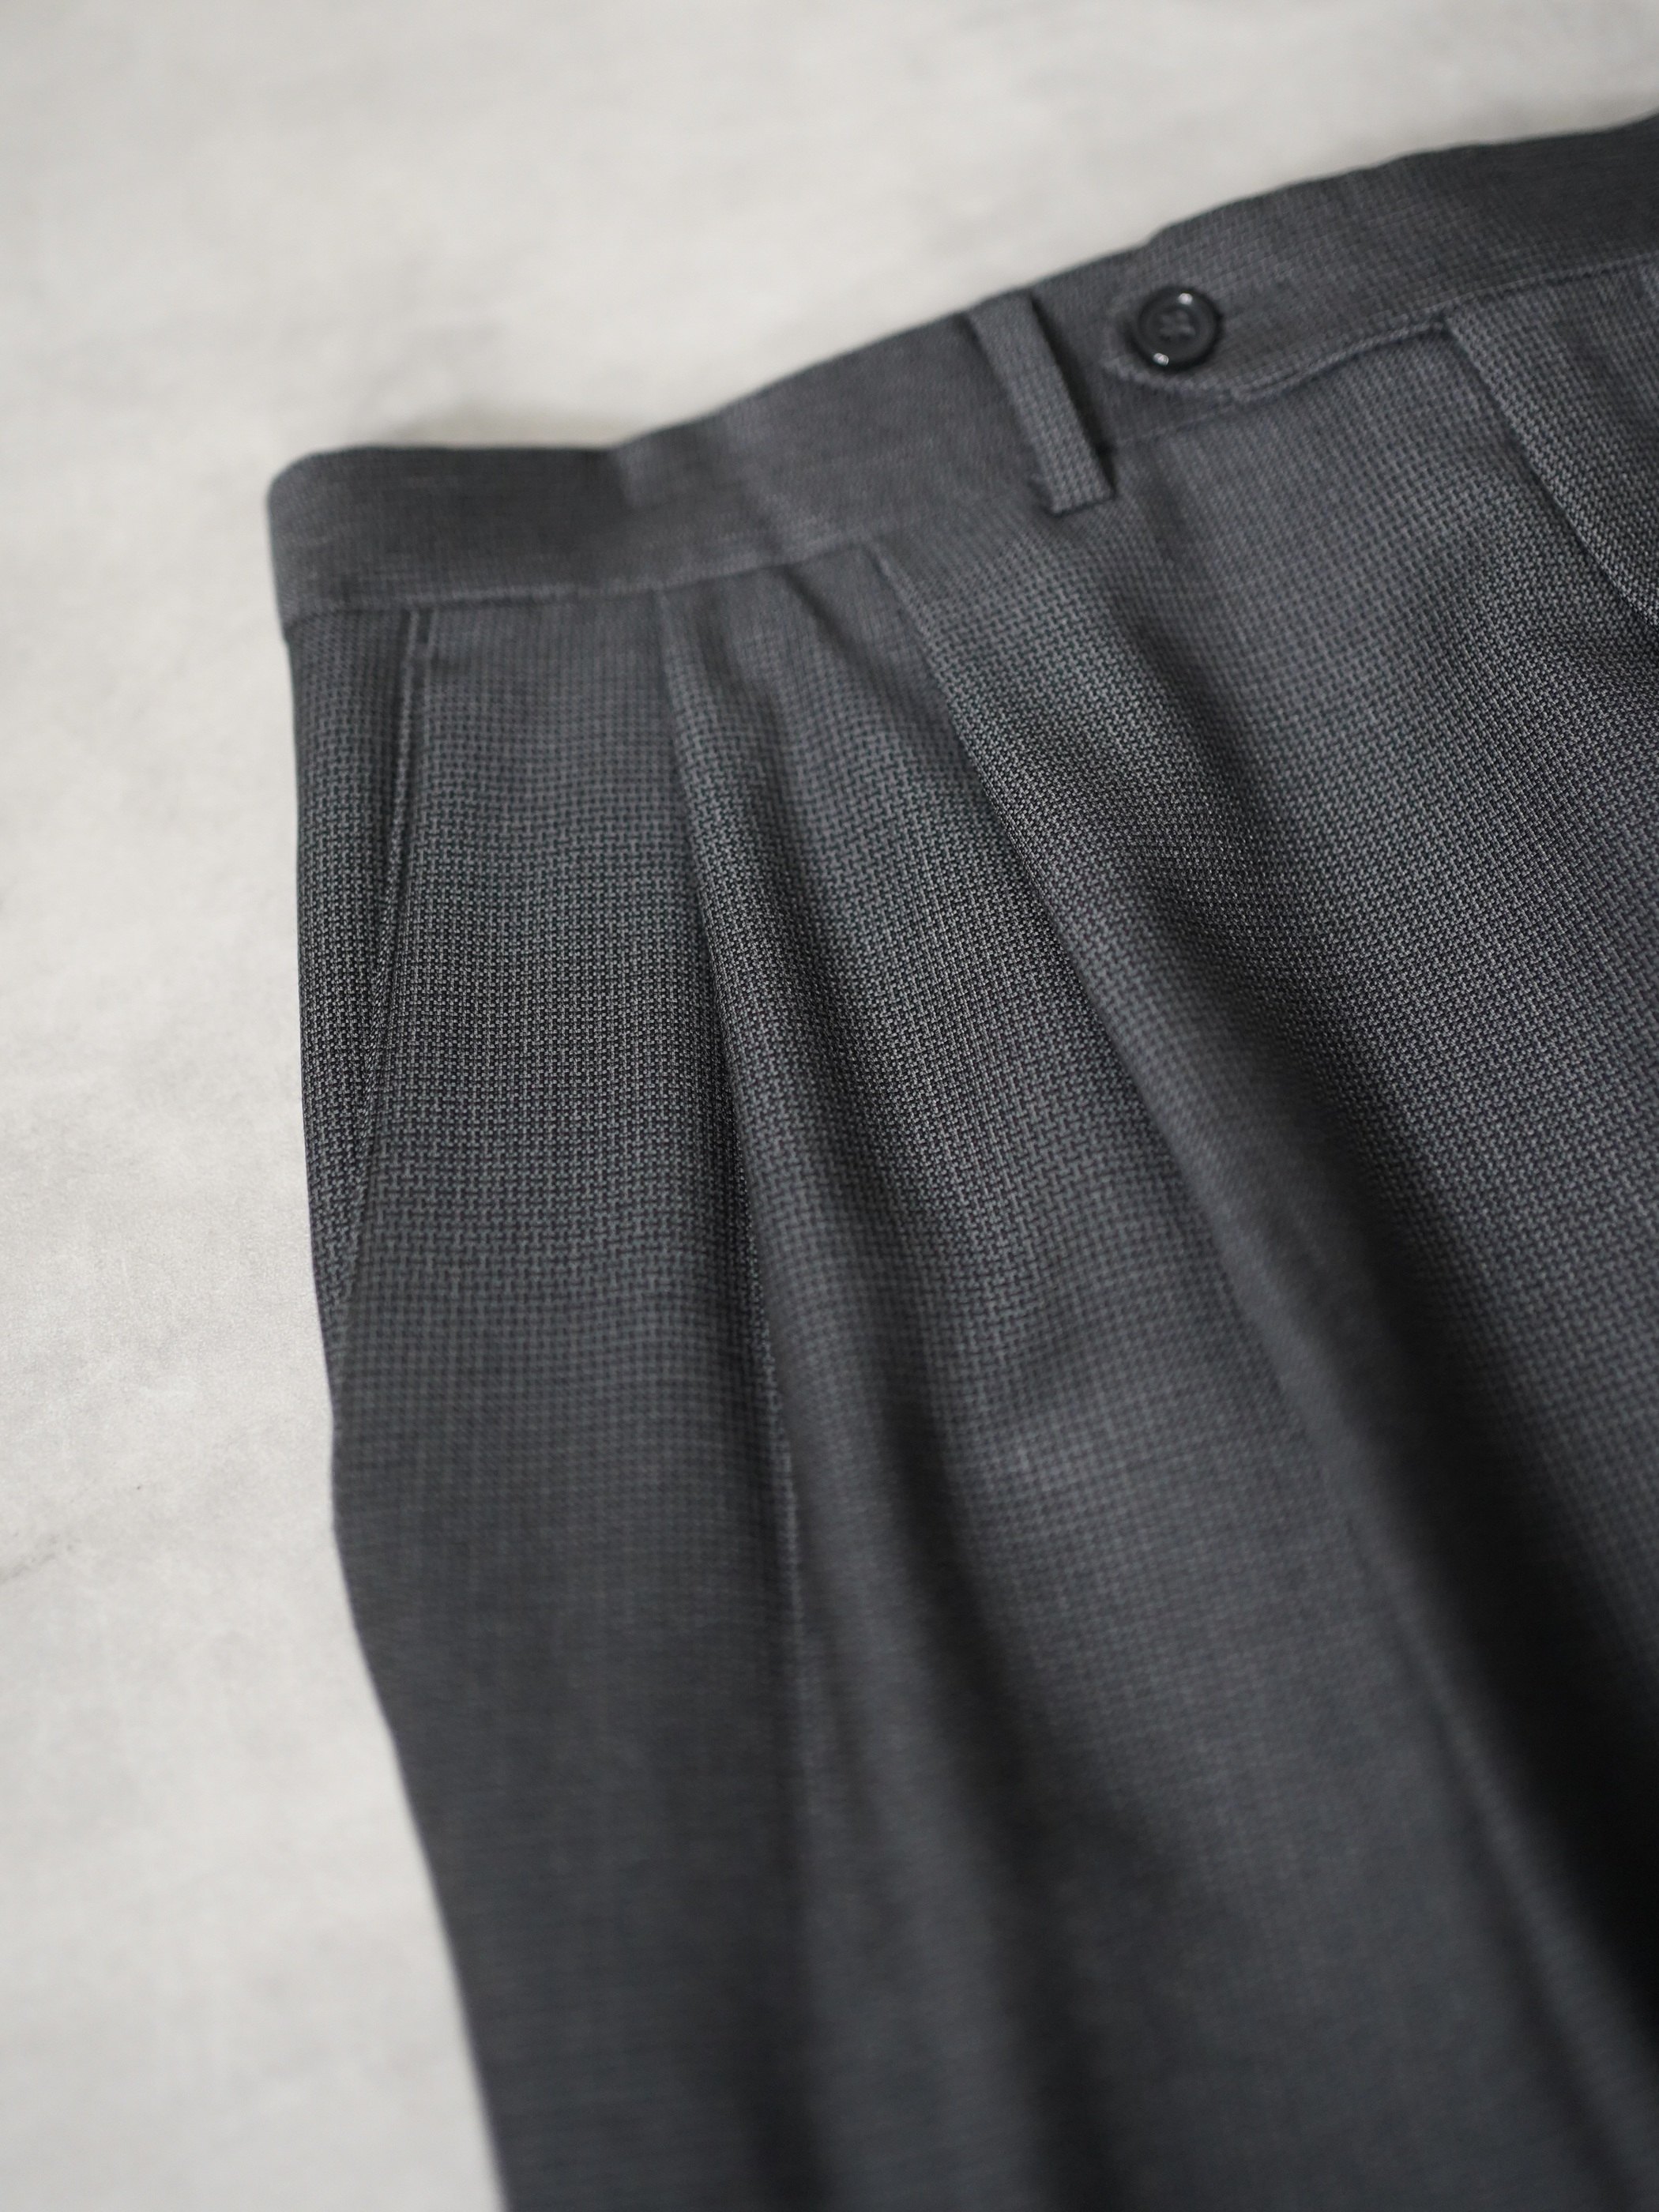 PAZONI 2tuck dress trousers / Made in Italy